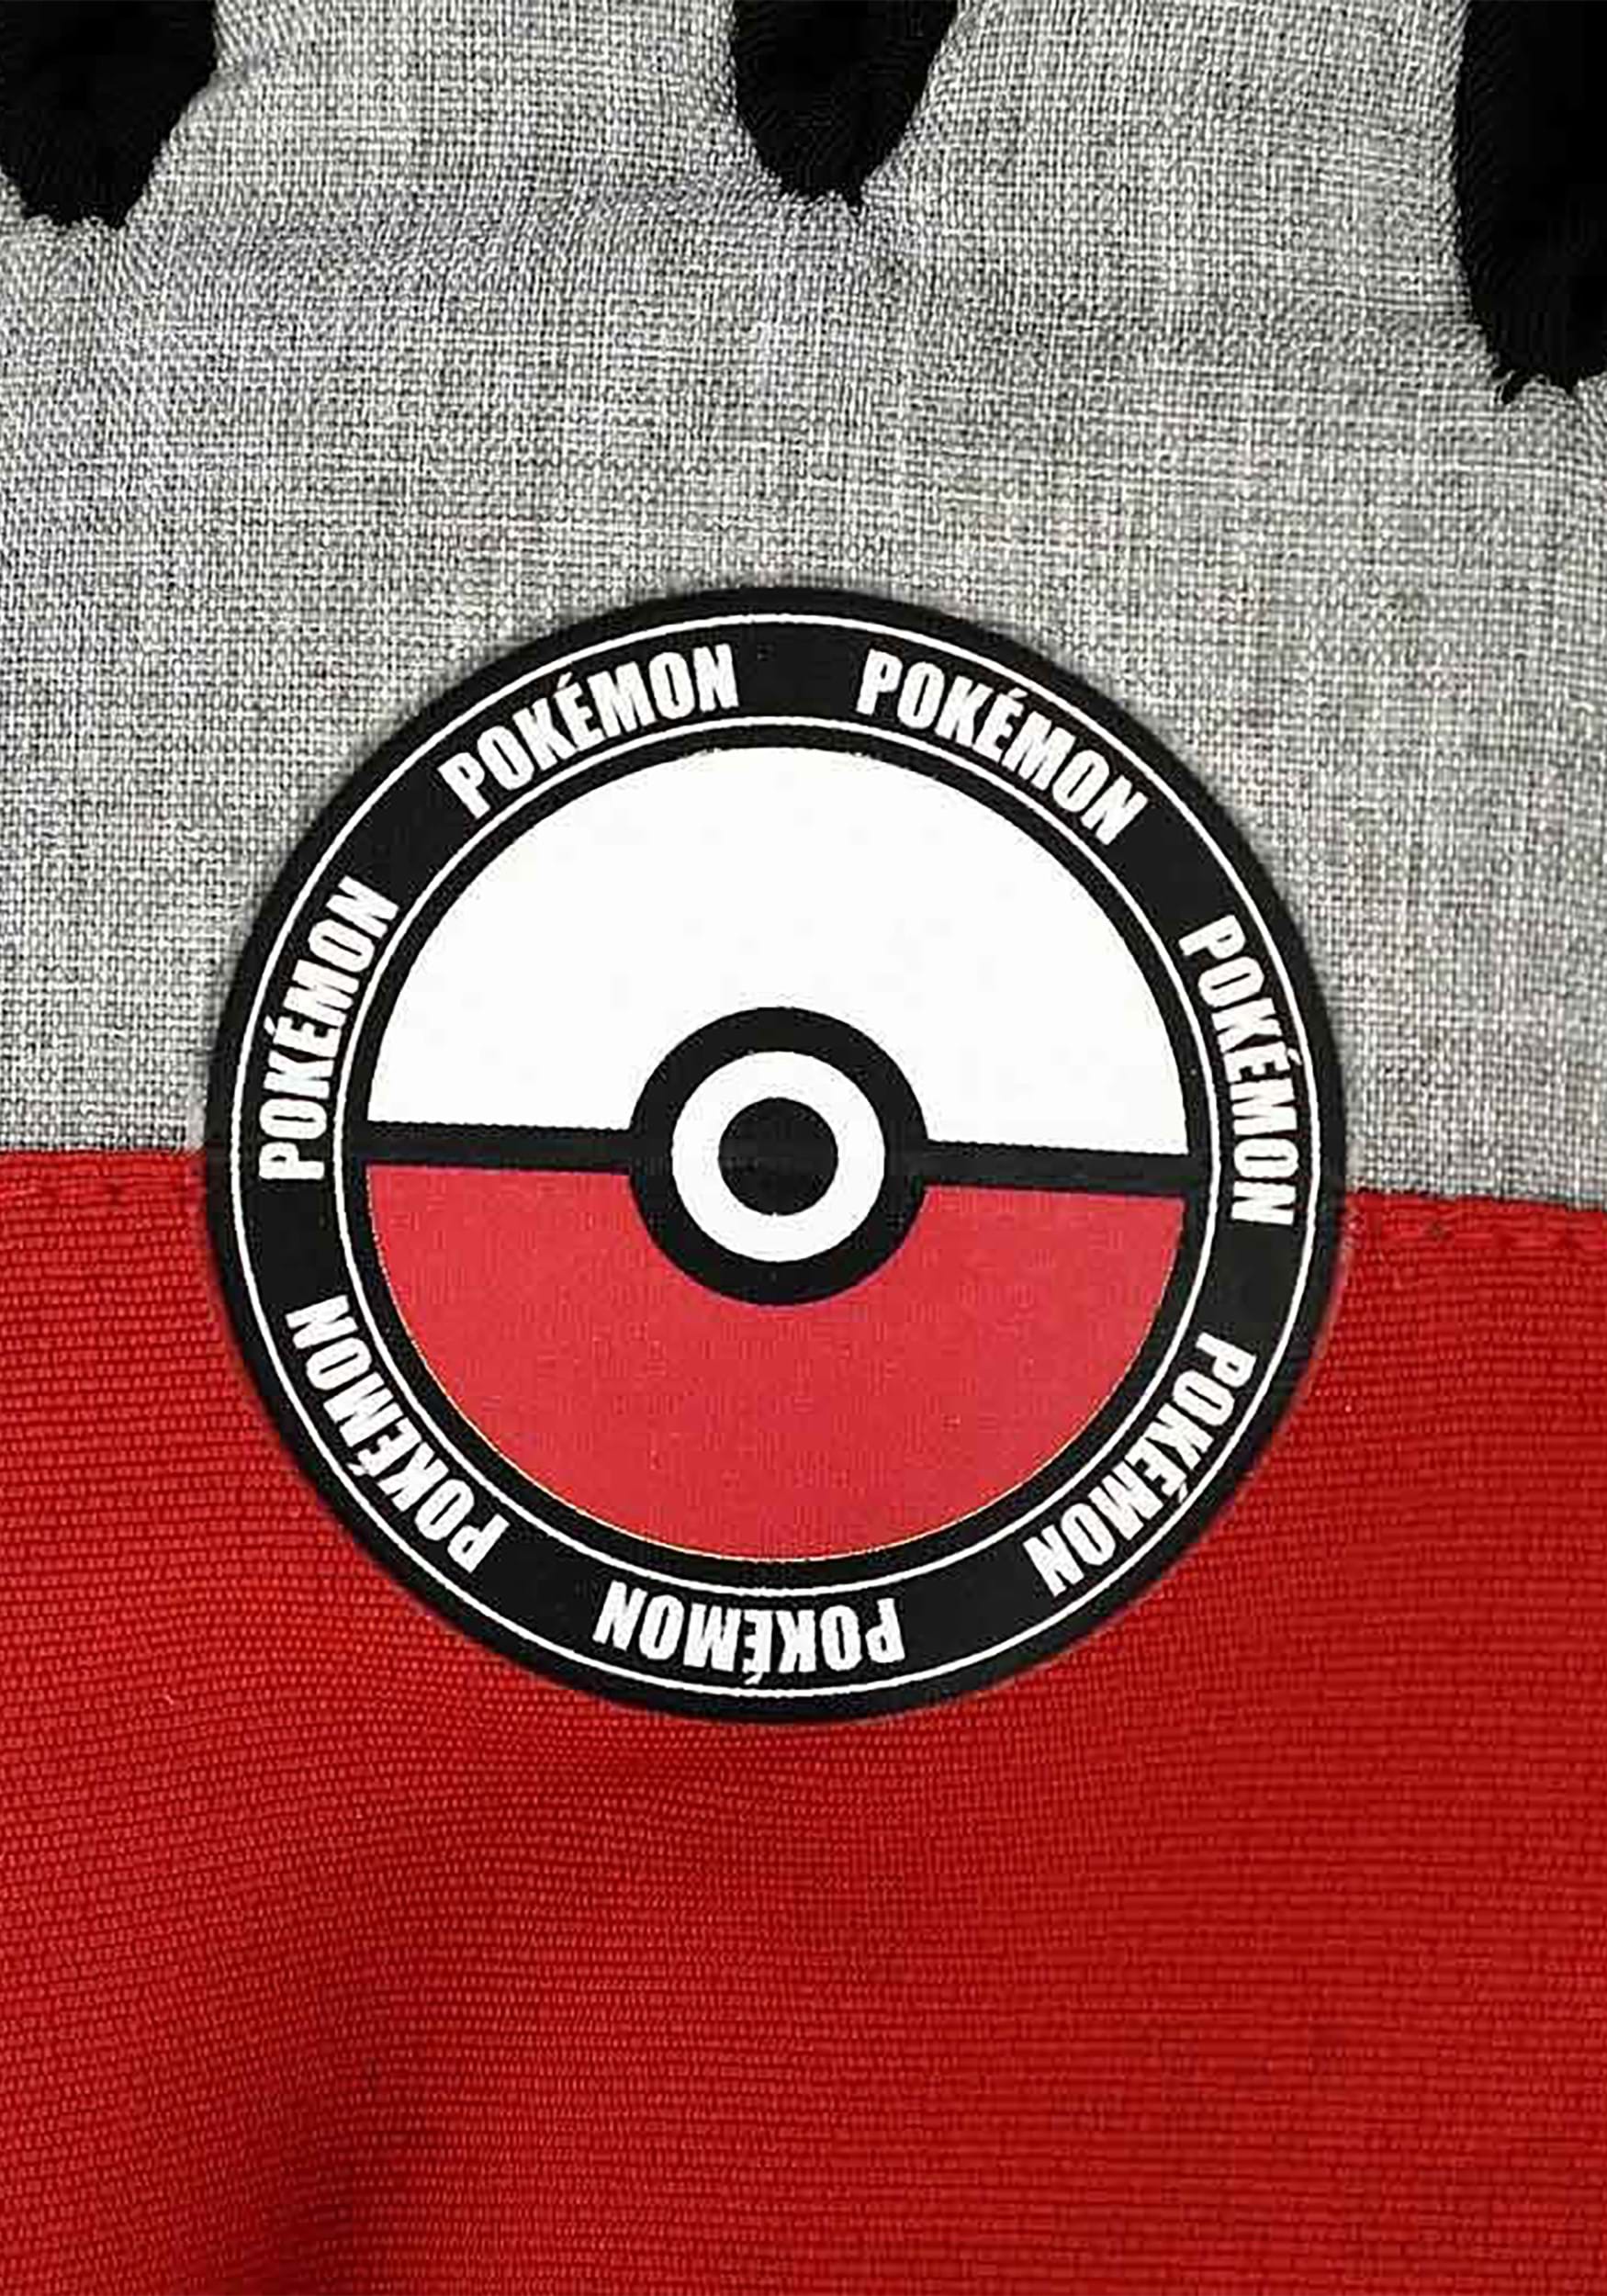 Pocket Monsters Logo, Pokeball & Pikachu Embroidered Set of 3 Patches